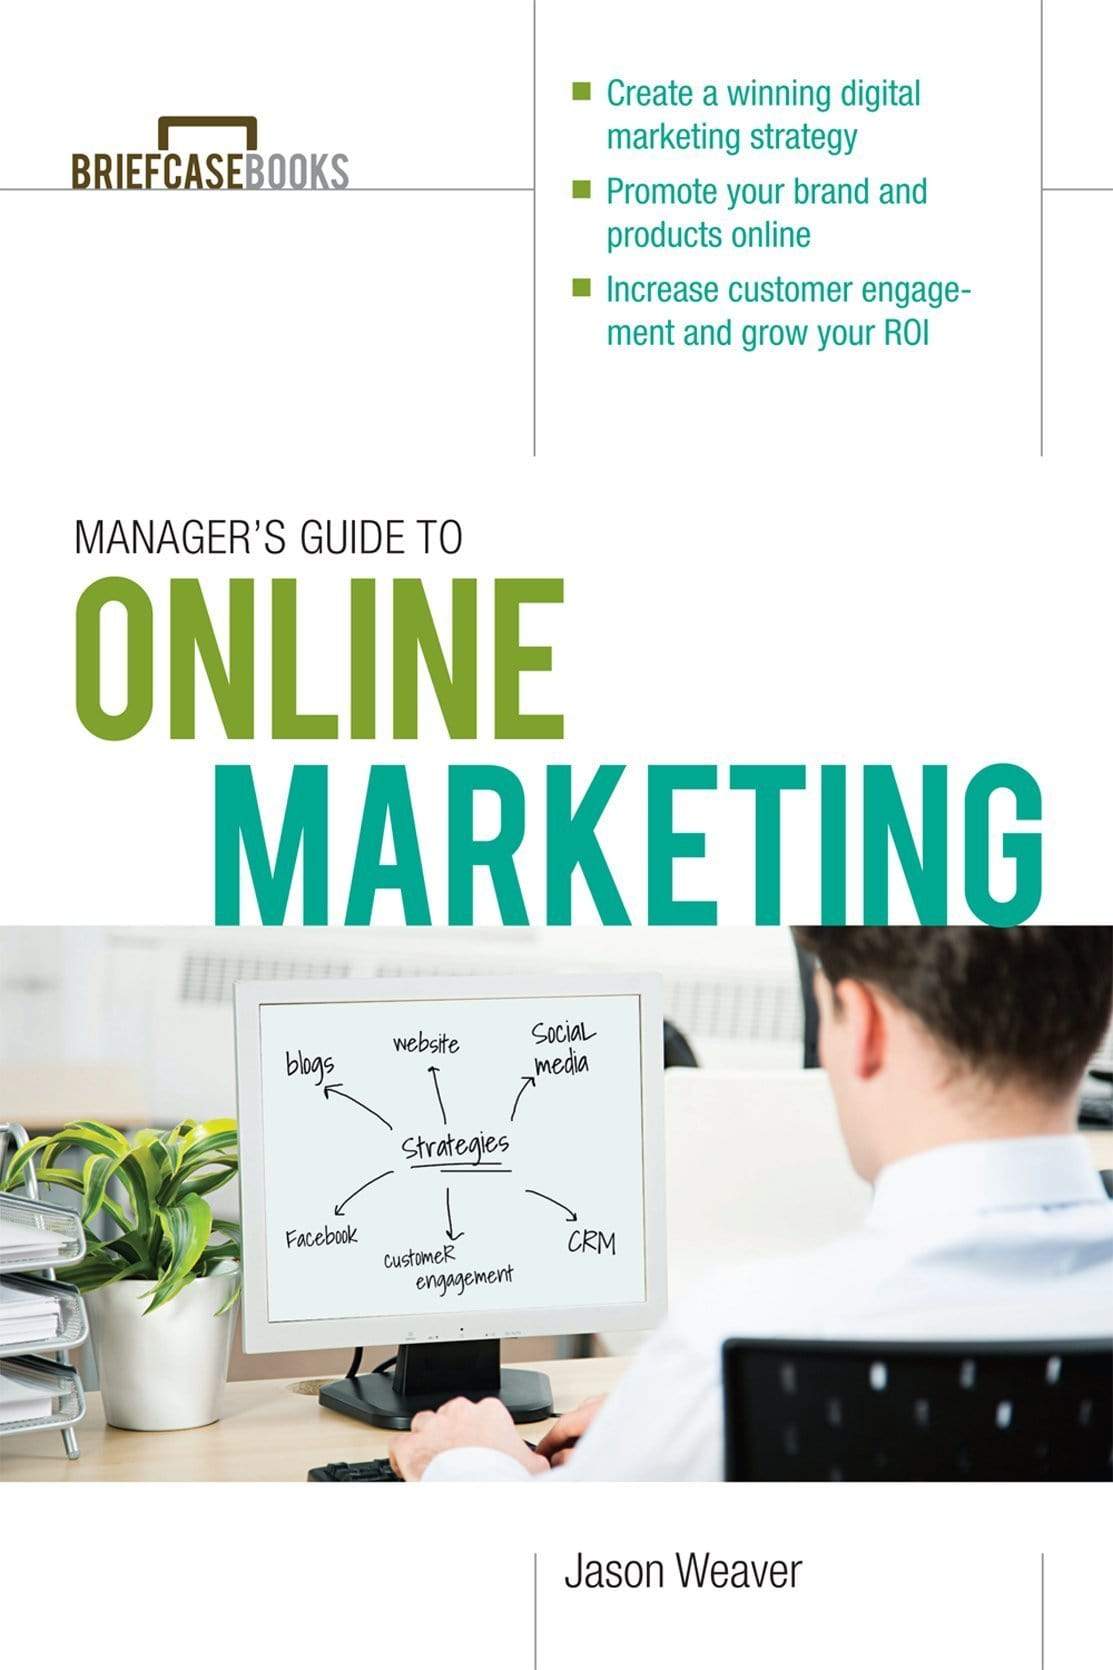 *Manager's Guide To Online Marketing